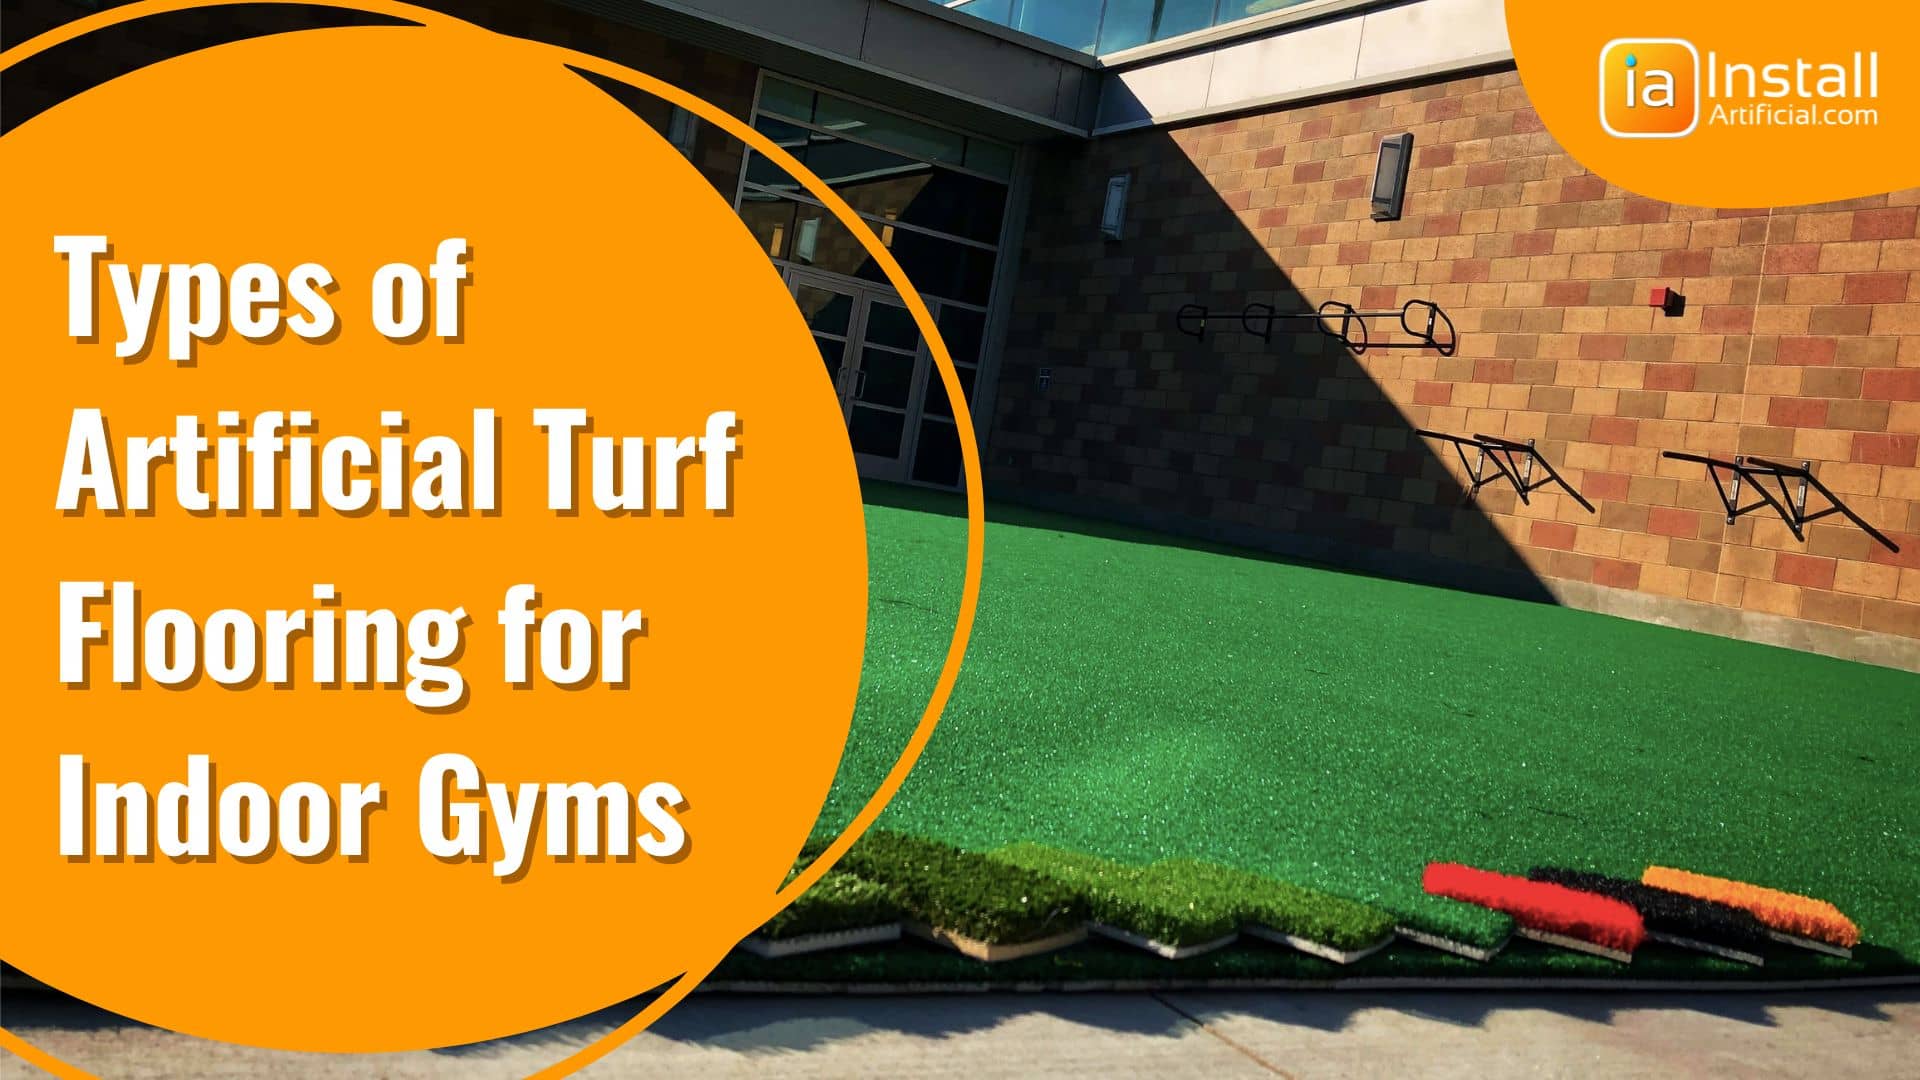 Types of Artificial Turf Flooring for Indoor Gyms